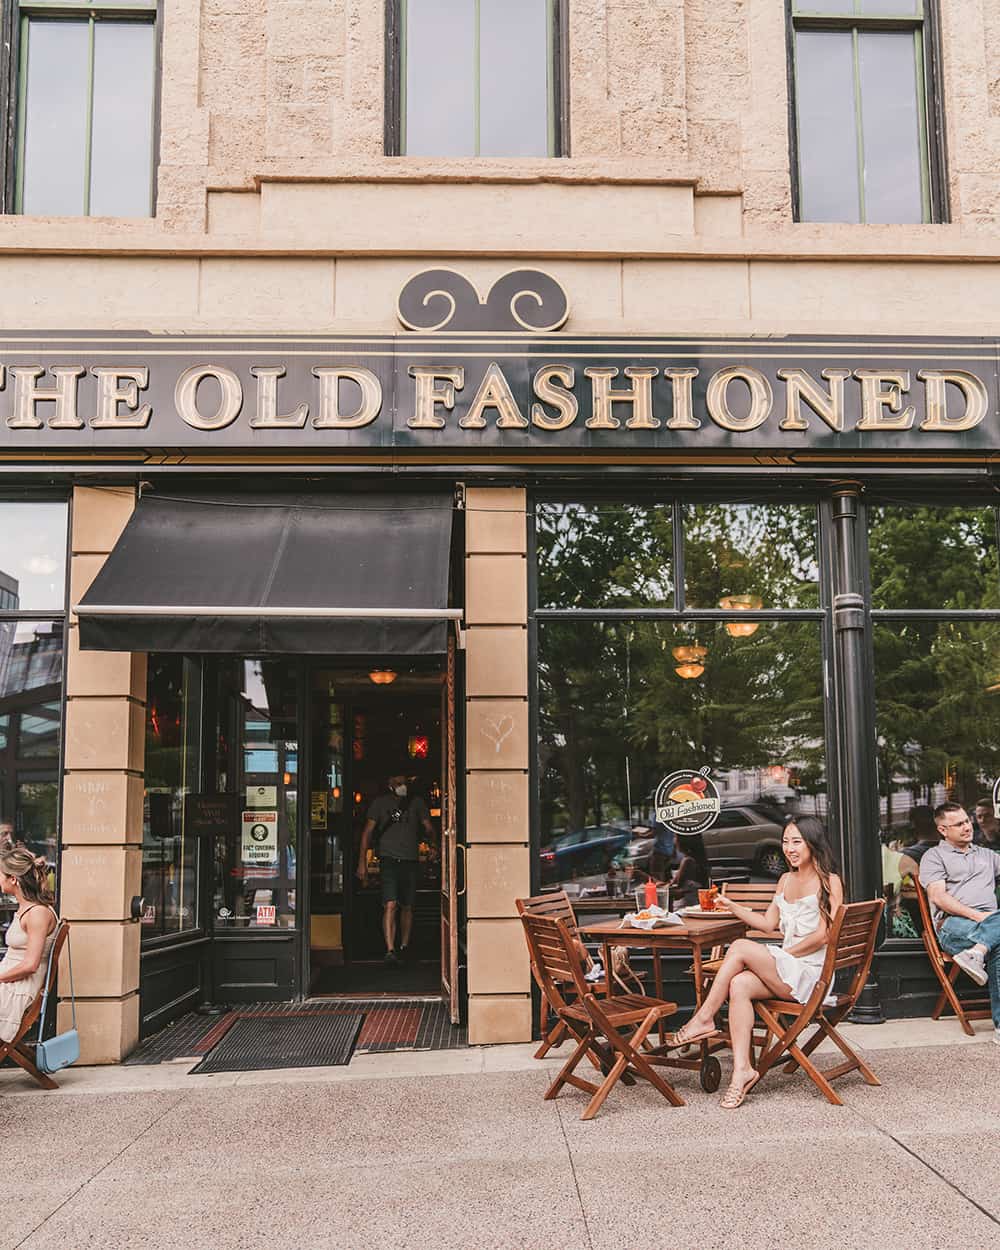 The Old Fashioned restaurant and bar in Madison Wisconsin